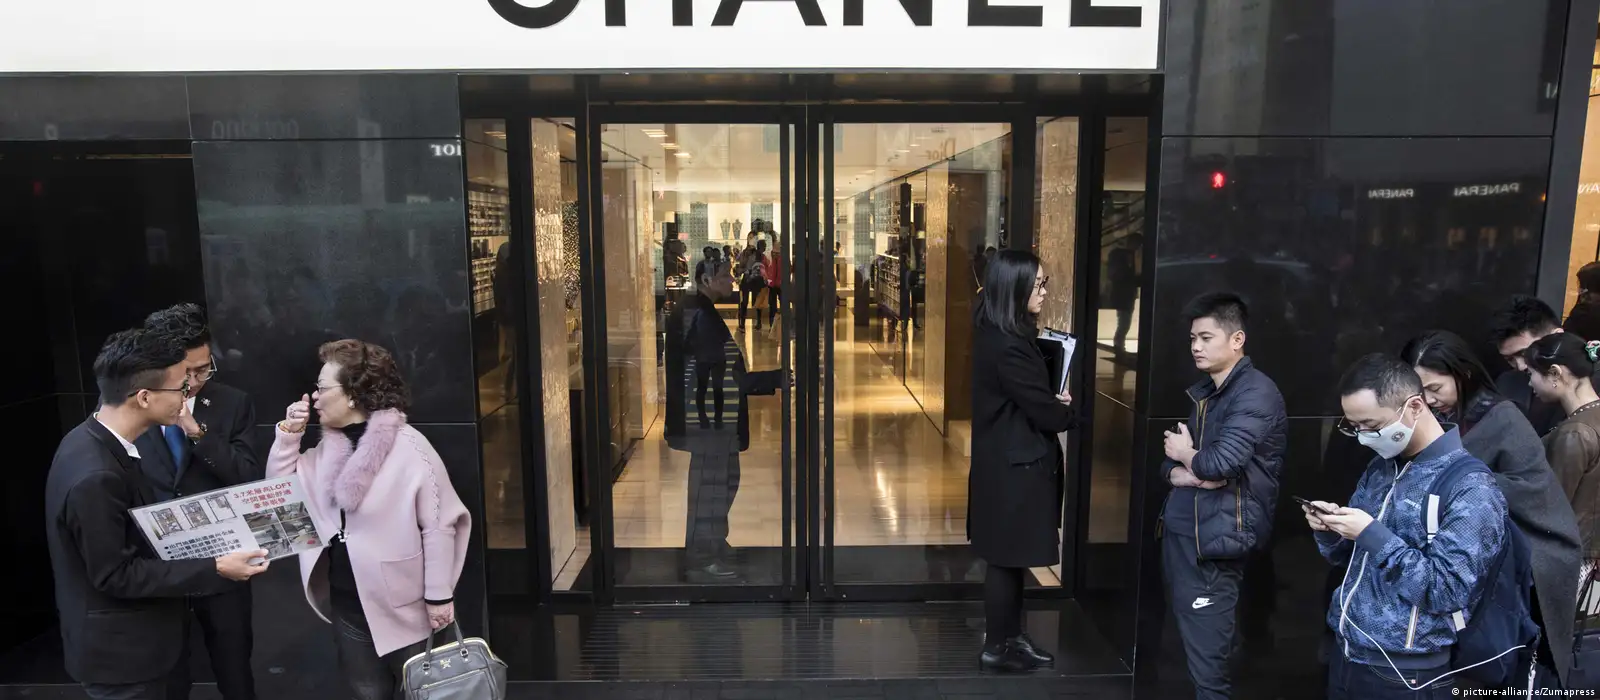 Why LVMH is moving out of Hong Kong to mainland China: instead of